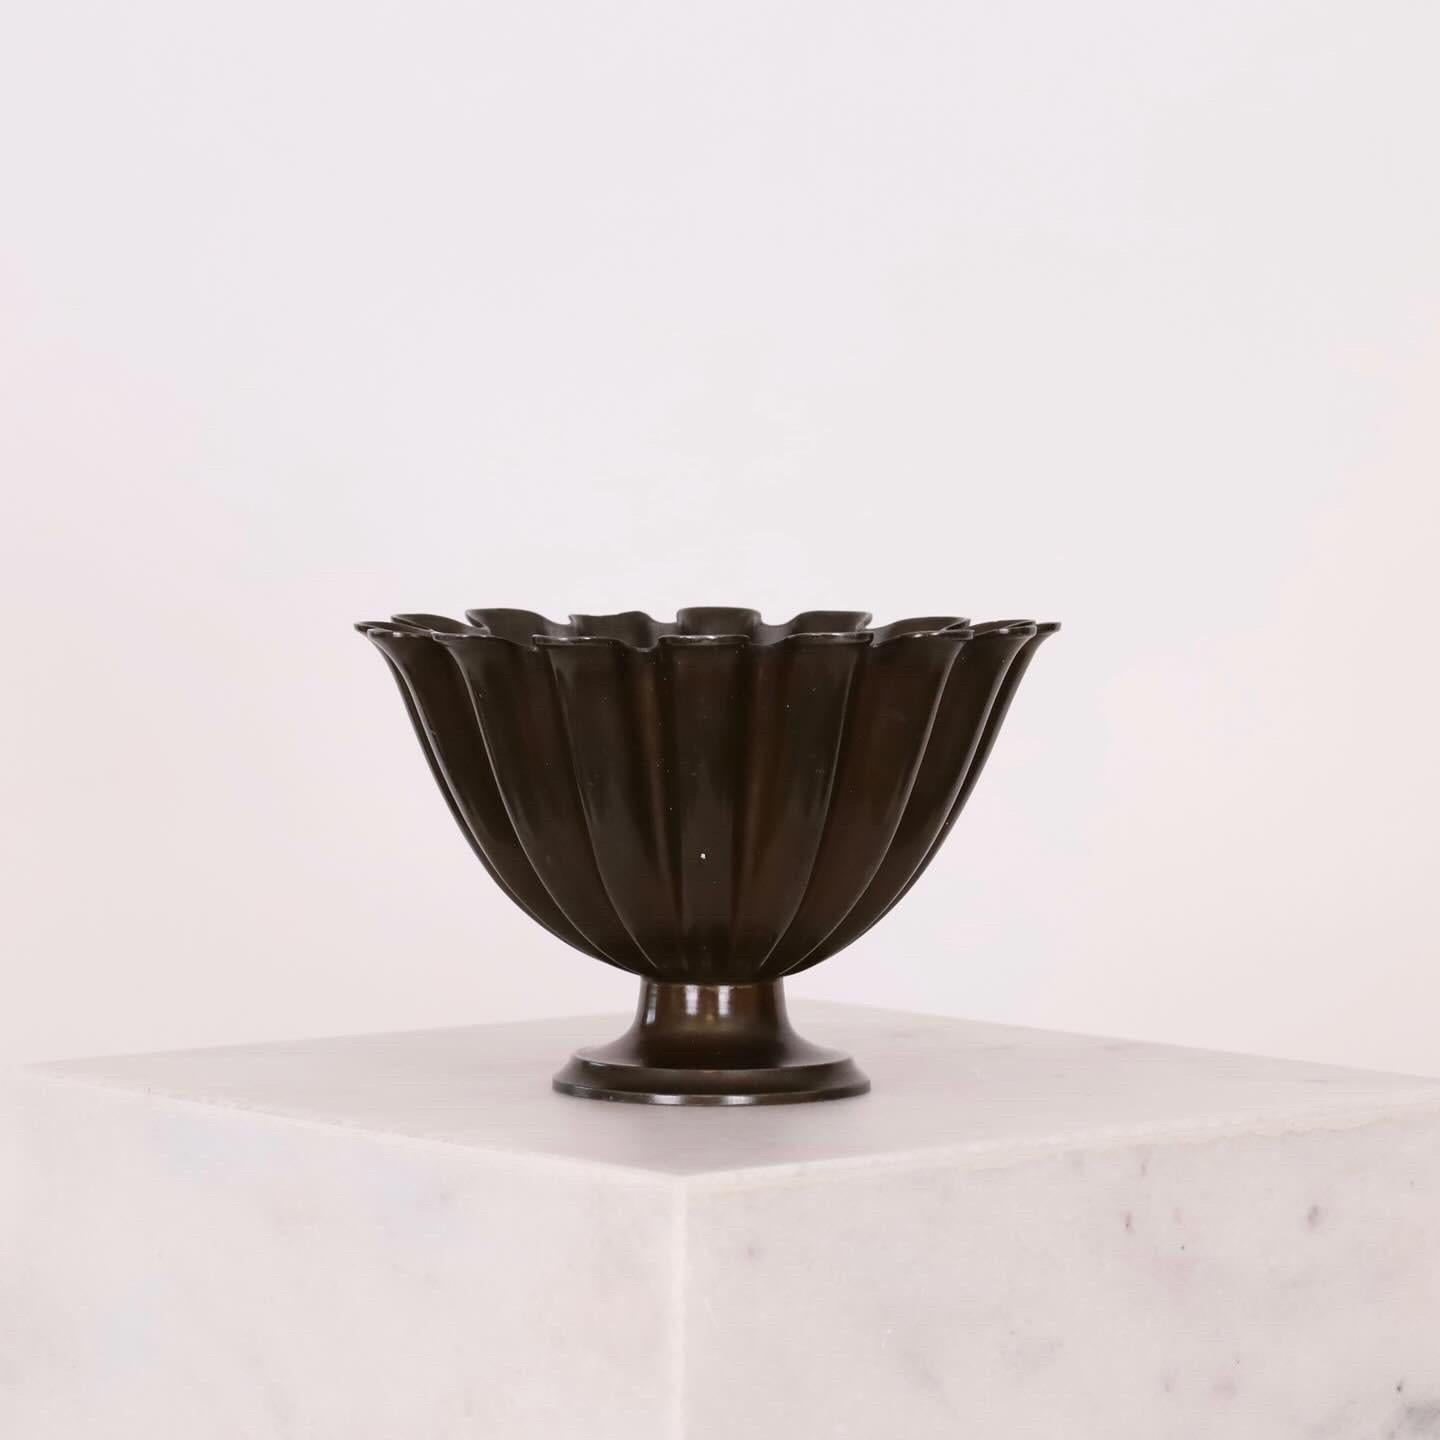 A scalloped pedestal discometal bowl made by Just Andersen 100 years ago. A capturing piece with years of history.

* A round scalloped bowl on foot made in disco metal
* Designer: Just Andersen
* Model: D137
* Year: 1926-1929
* Condition: Good